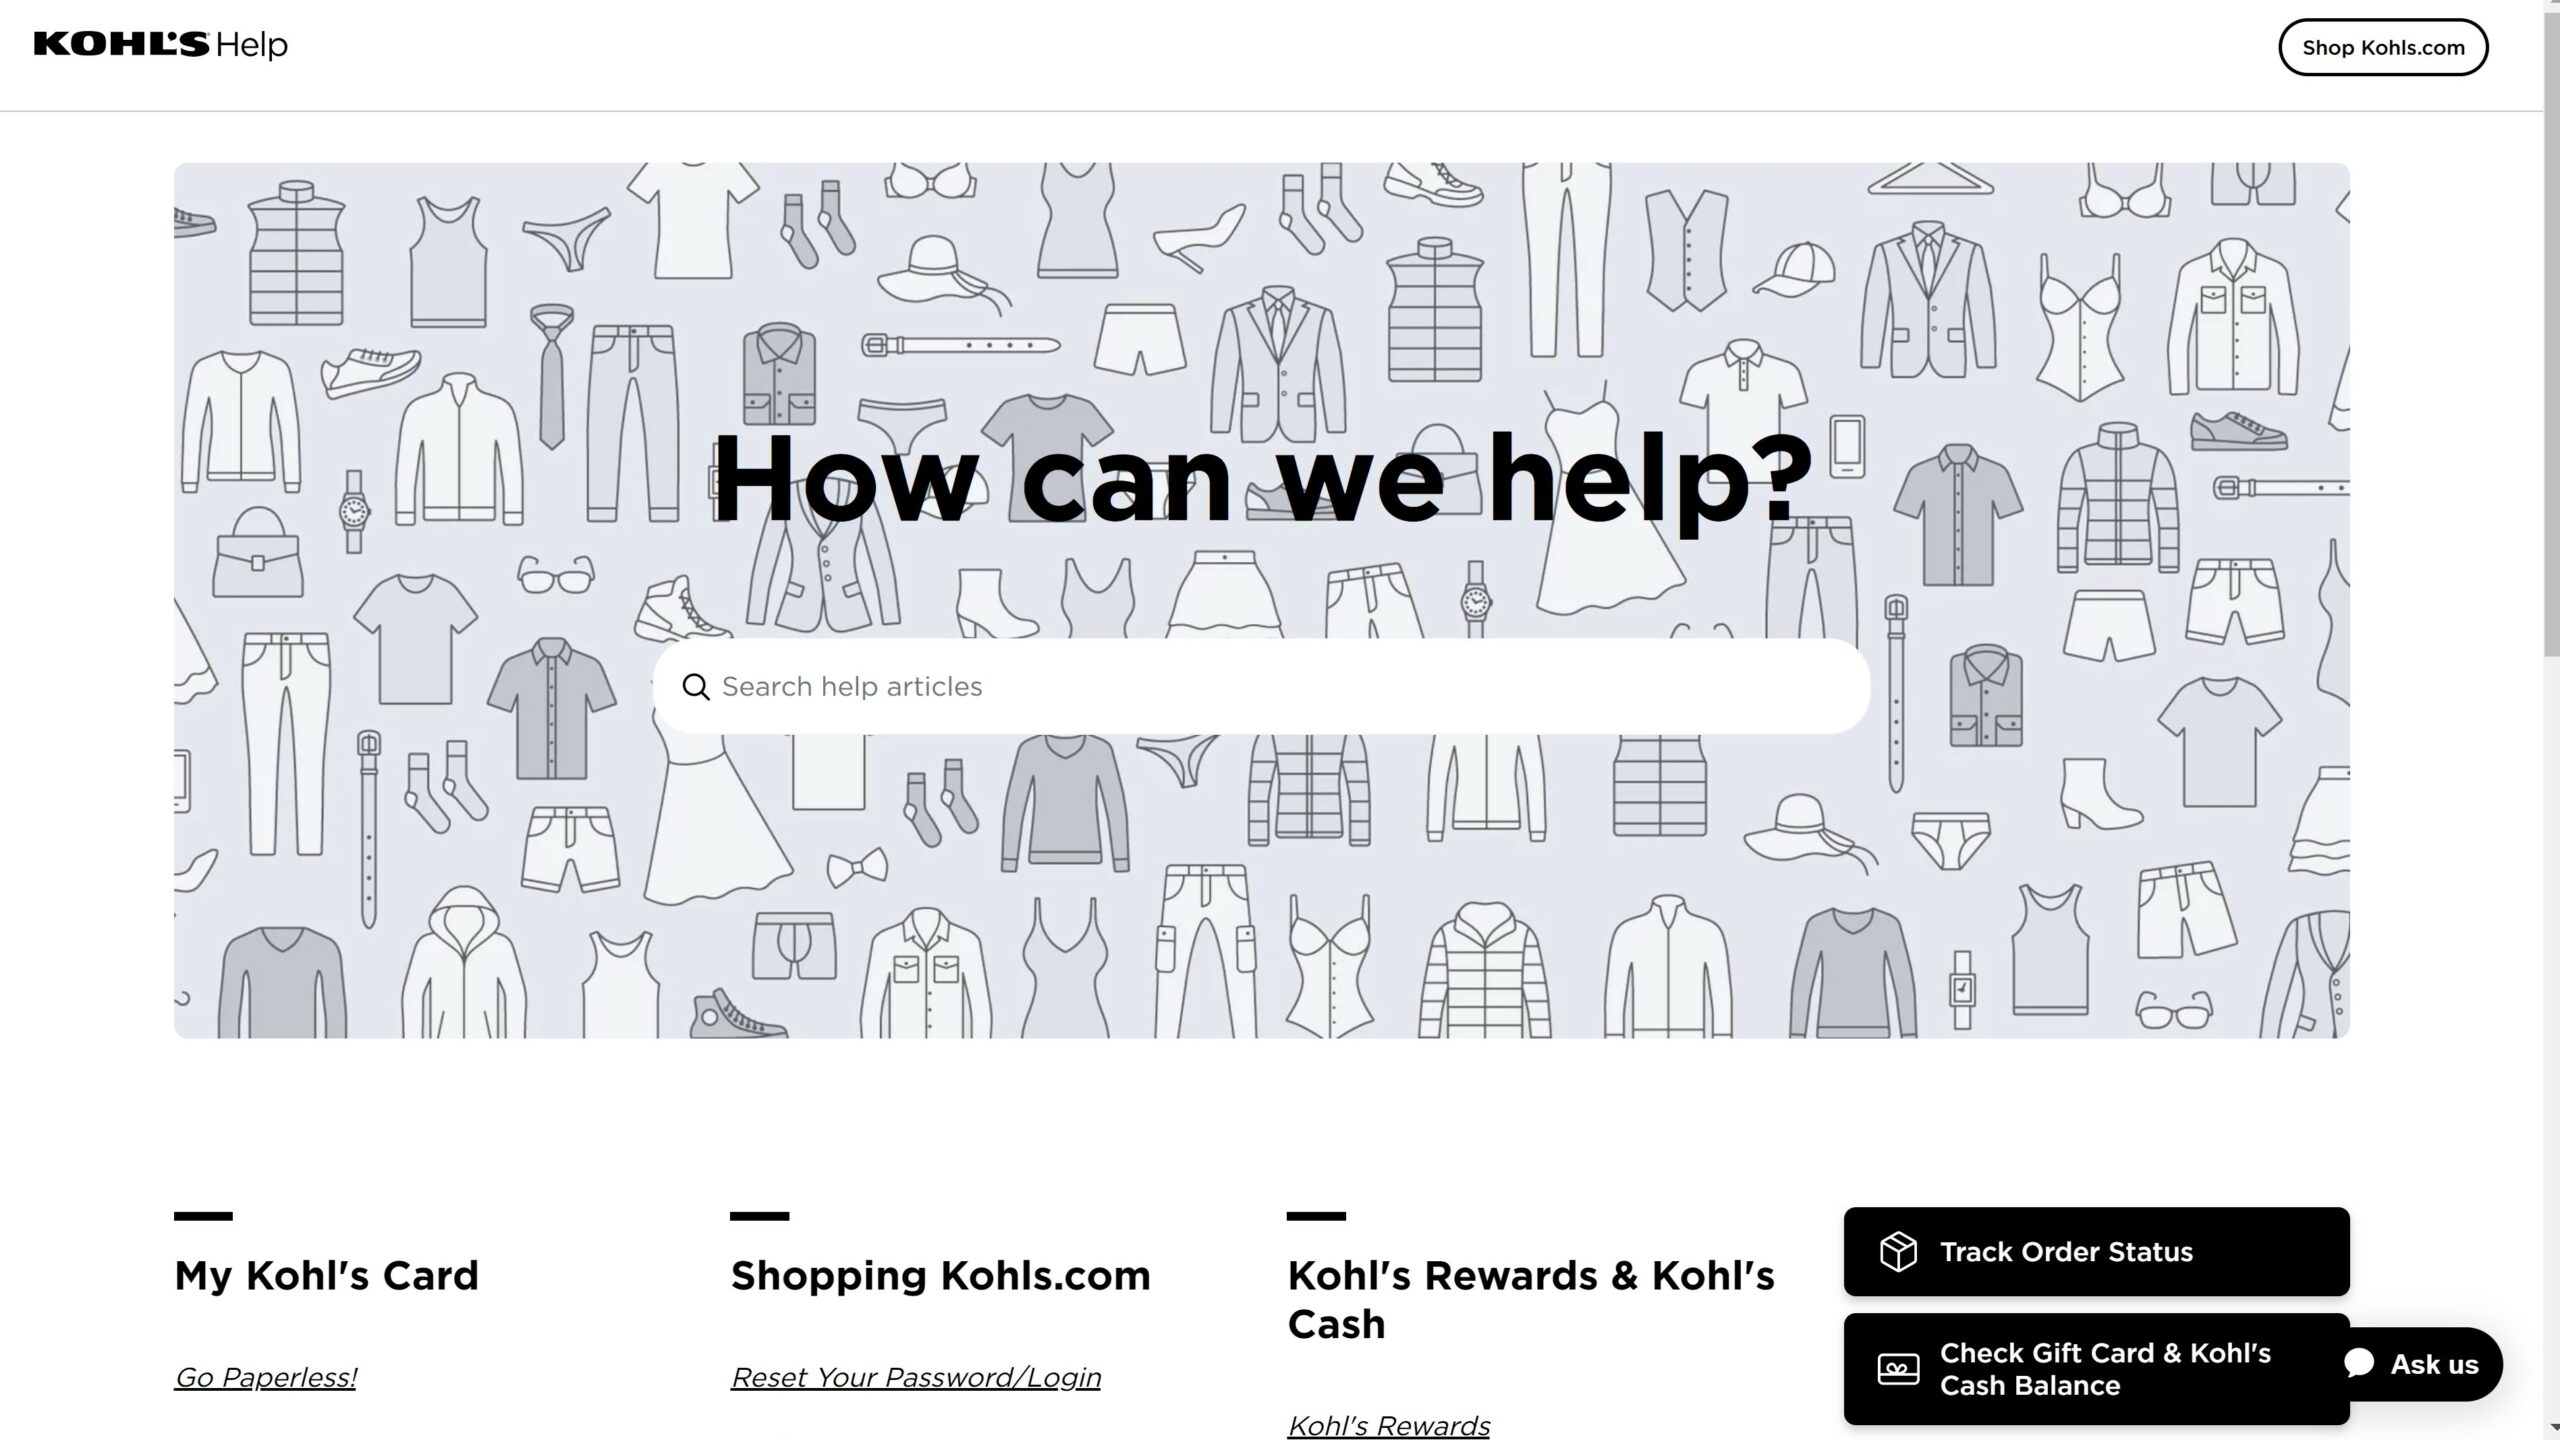 Kohl's contact us page